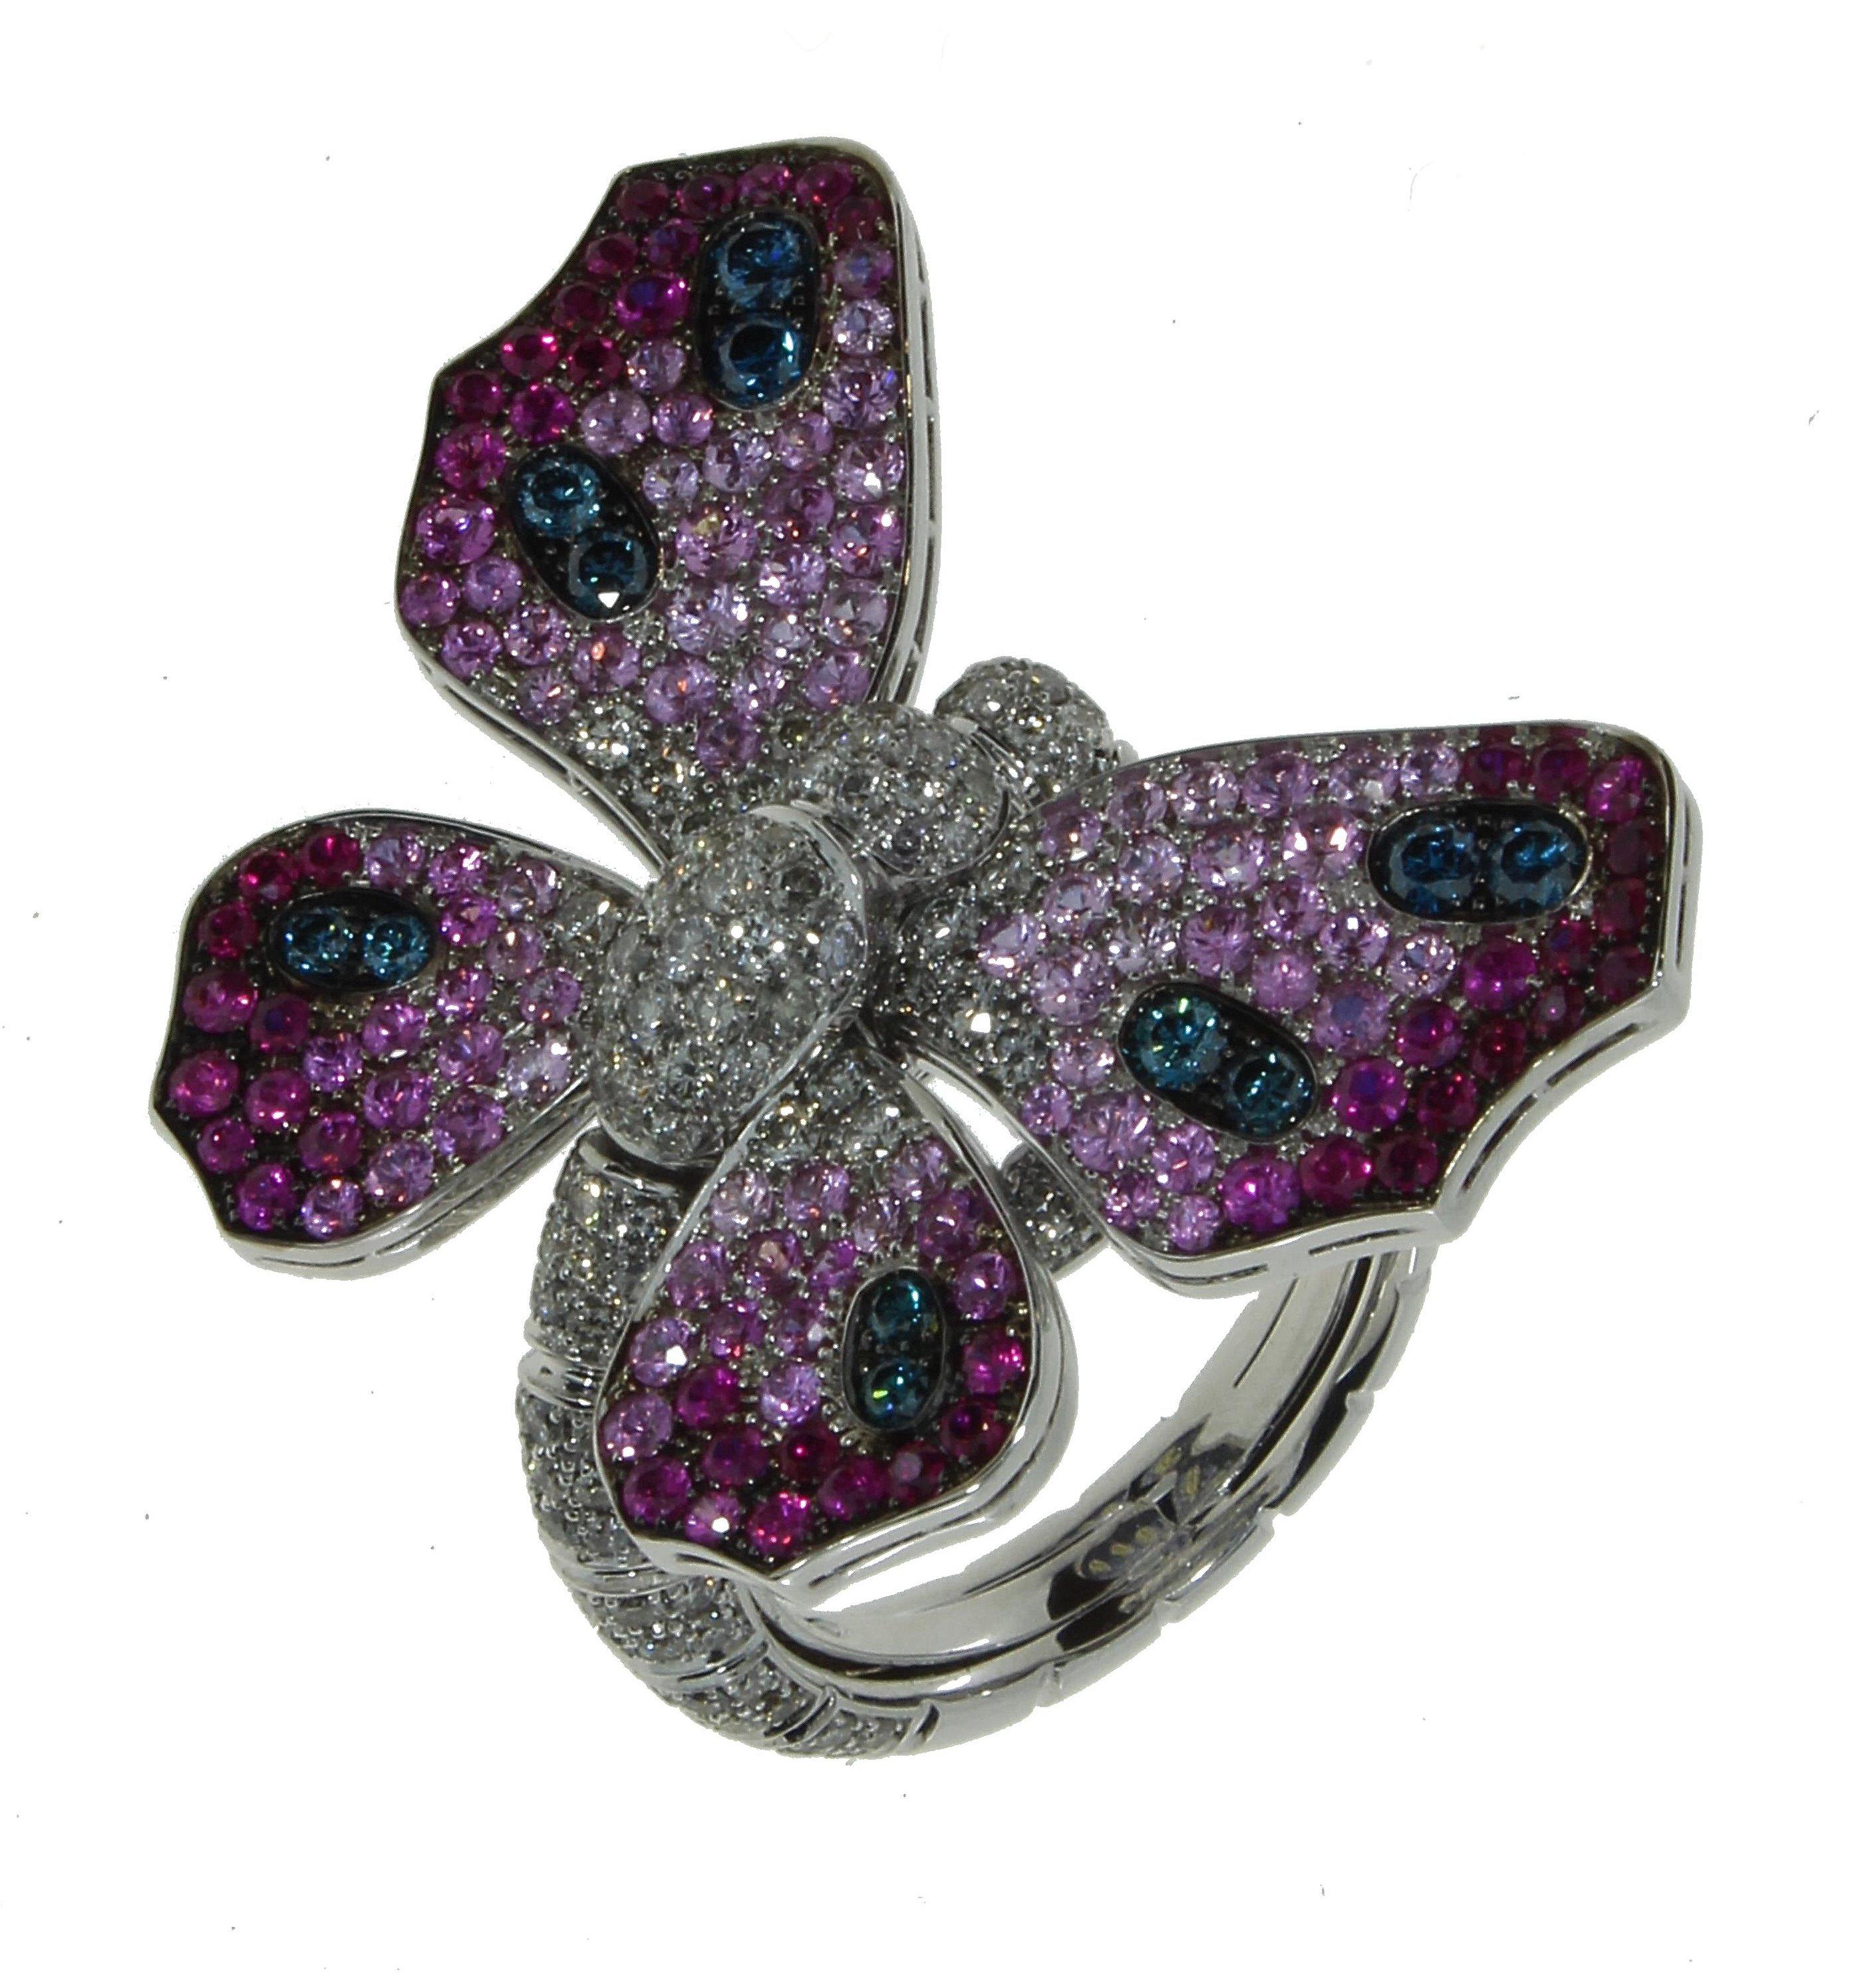 Majestic and glamorous, this 18 Kt white gold ring features a beautiful, eye-catching butterfly. One side of the butterfly is lined with white diamonds as well as light blue, dark blue and yellow sapphires. The other side has white diamonds, light